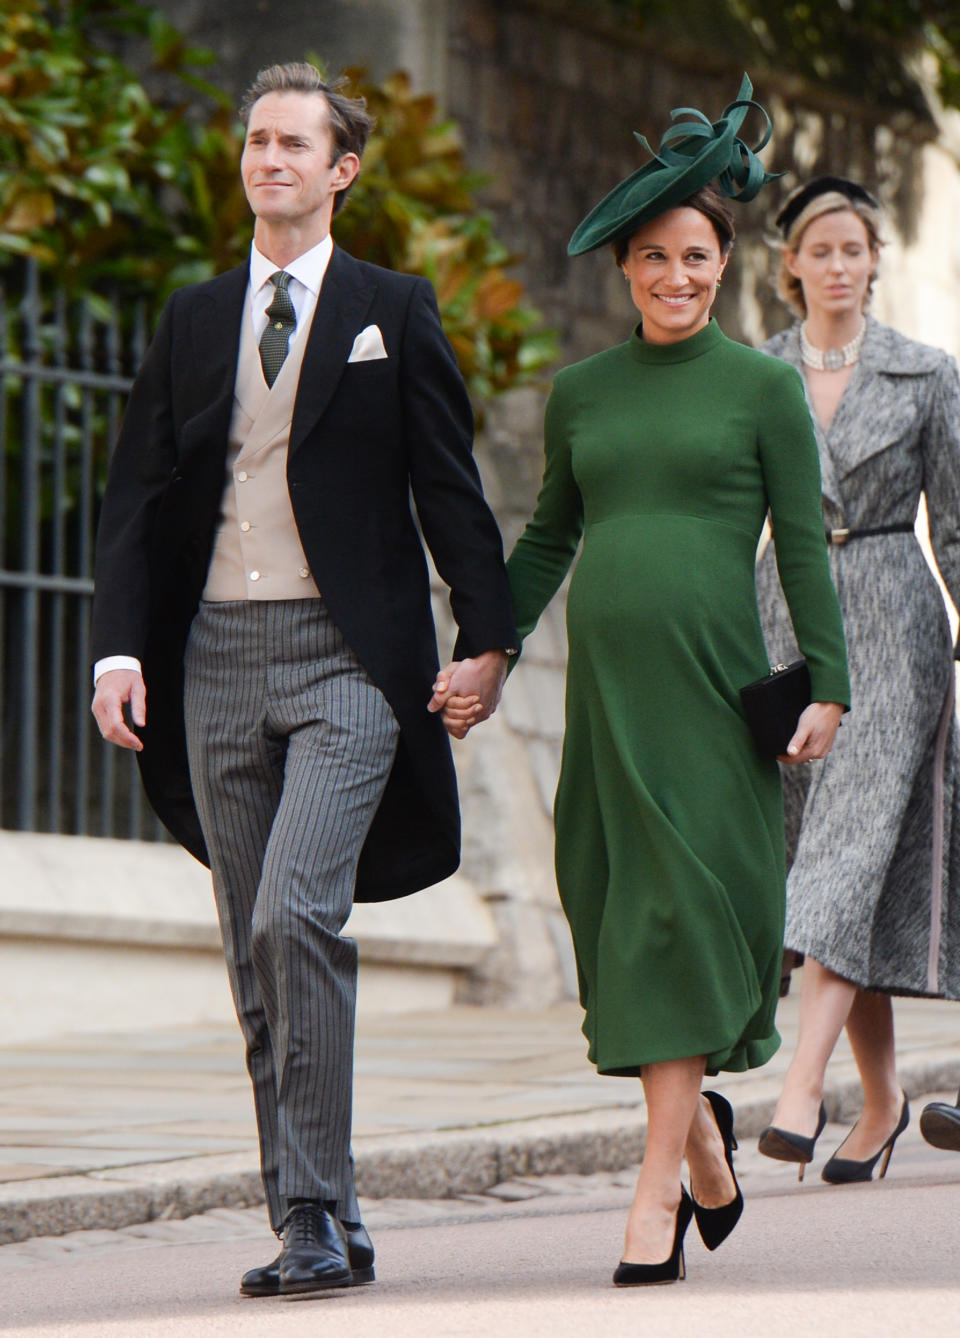 Pippa Middleton has paid tribute to the one member of the royal family with her son’s name. Photo: Getty Images